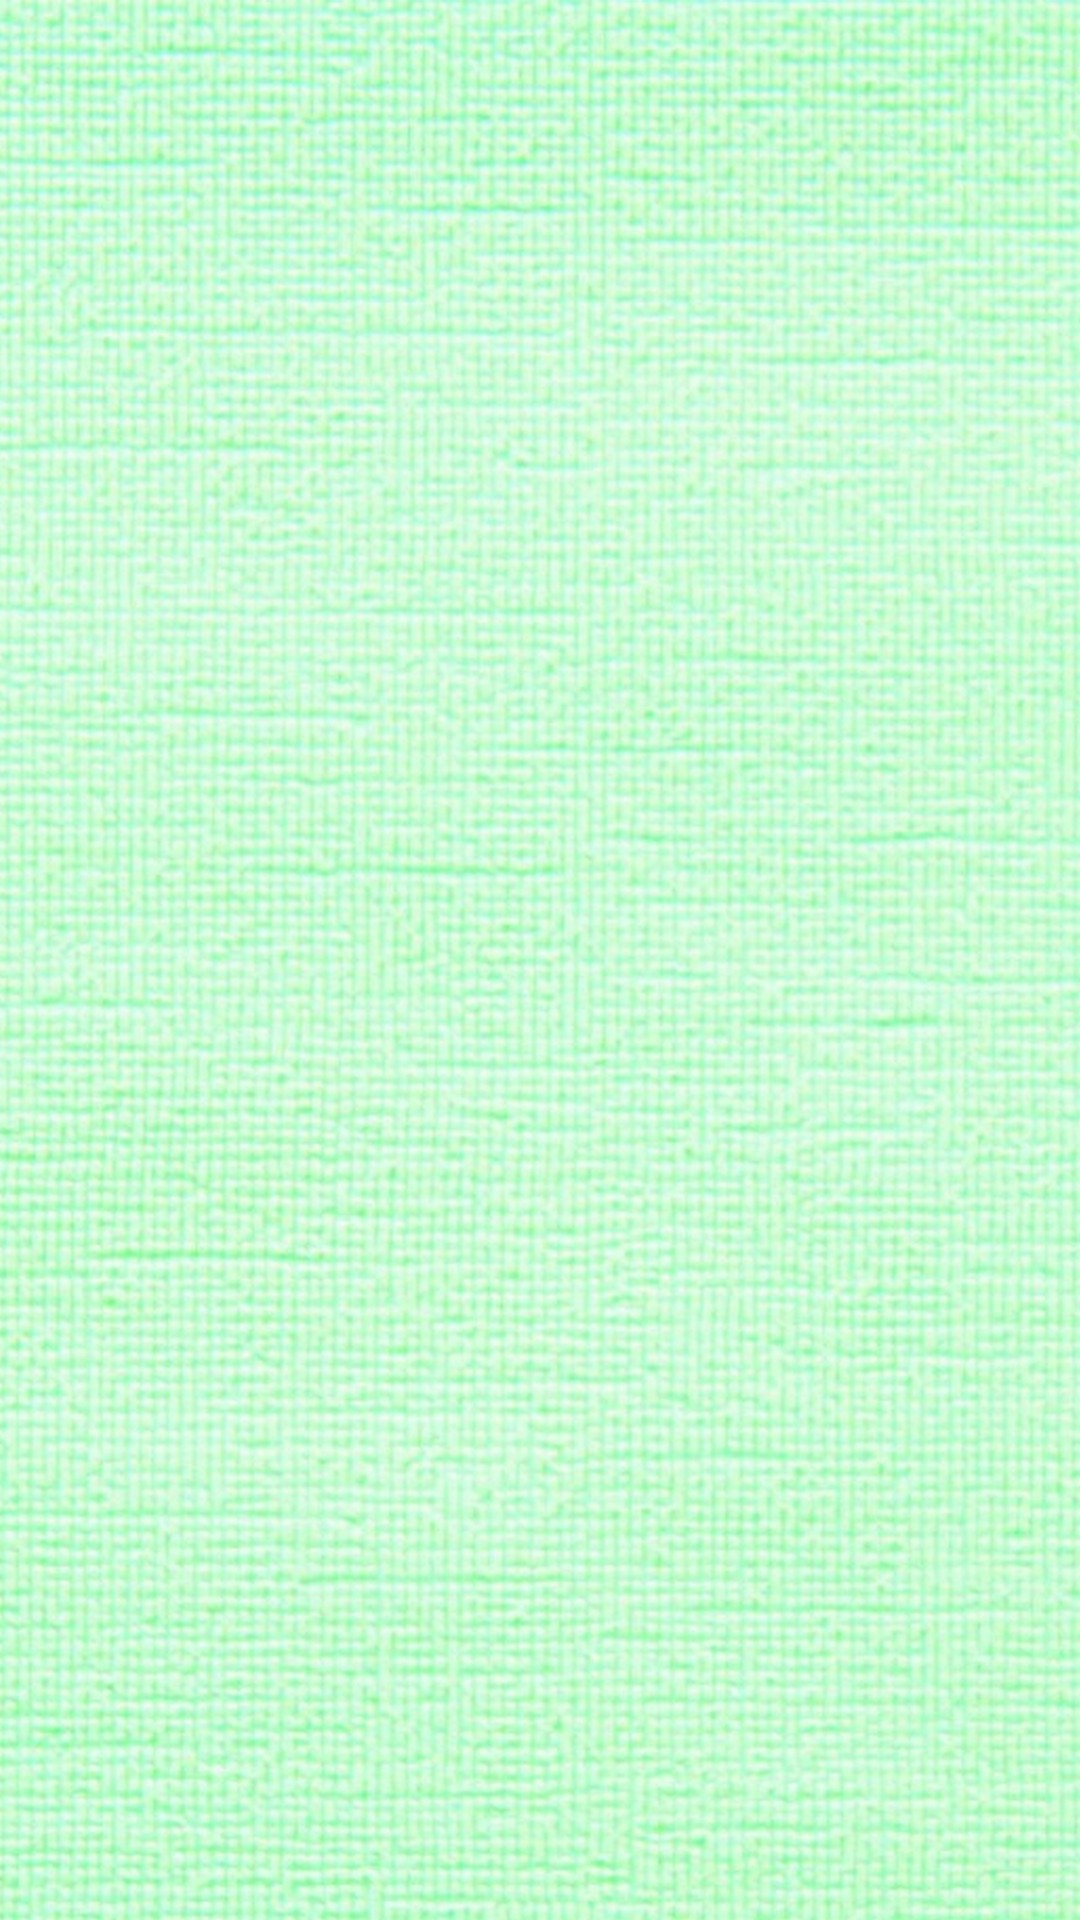 Mint Green i Phones Wallpaper with high-resolution 1080x1920 pixel. Download all Mobile Wallpapers and Use them as wallpapers for your iPhone, Tablet, iPad, Android and other mobile devices